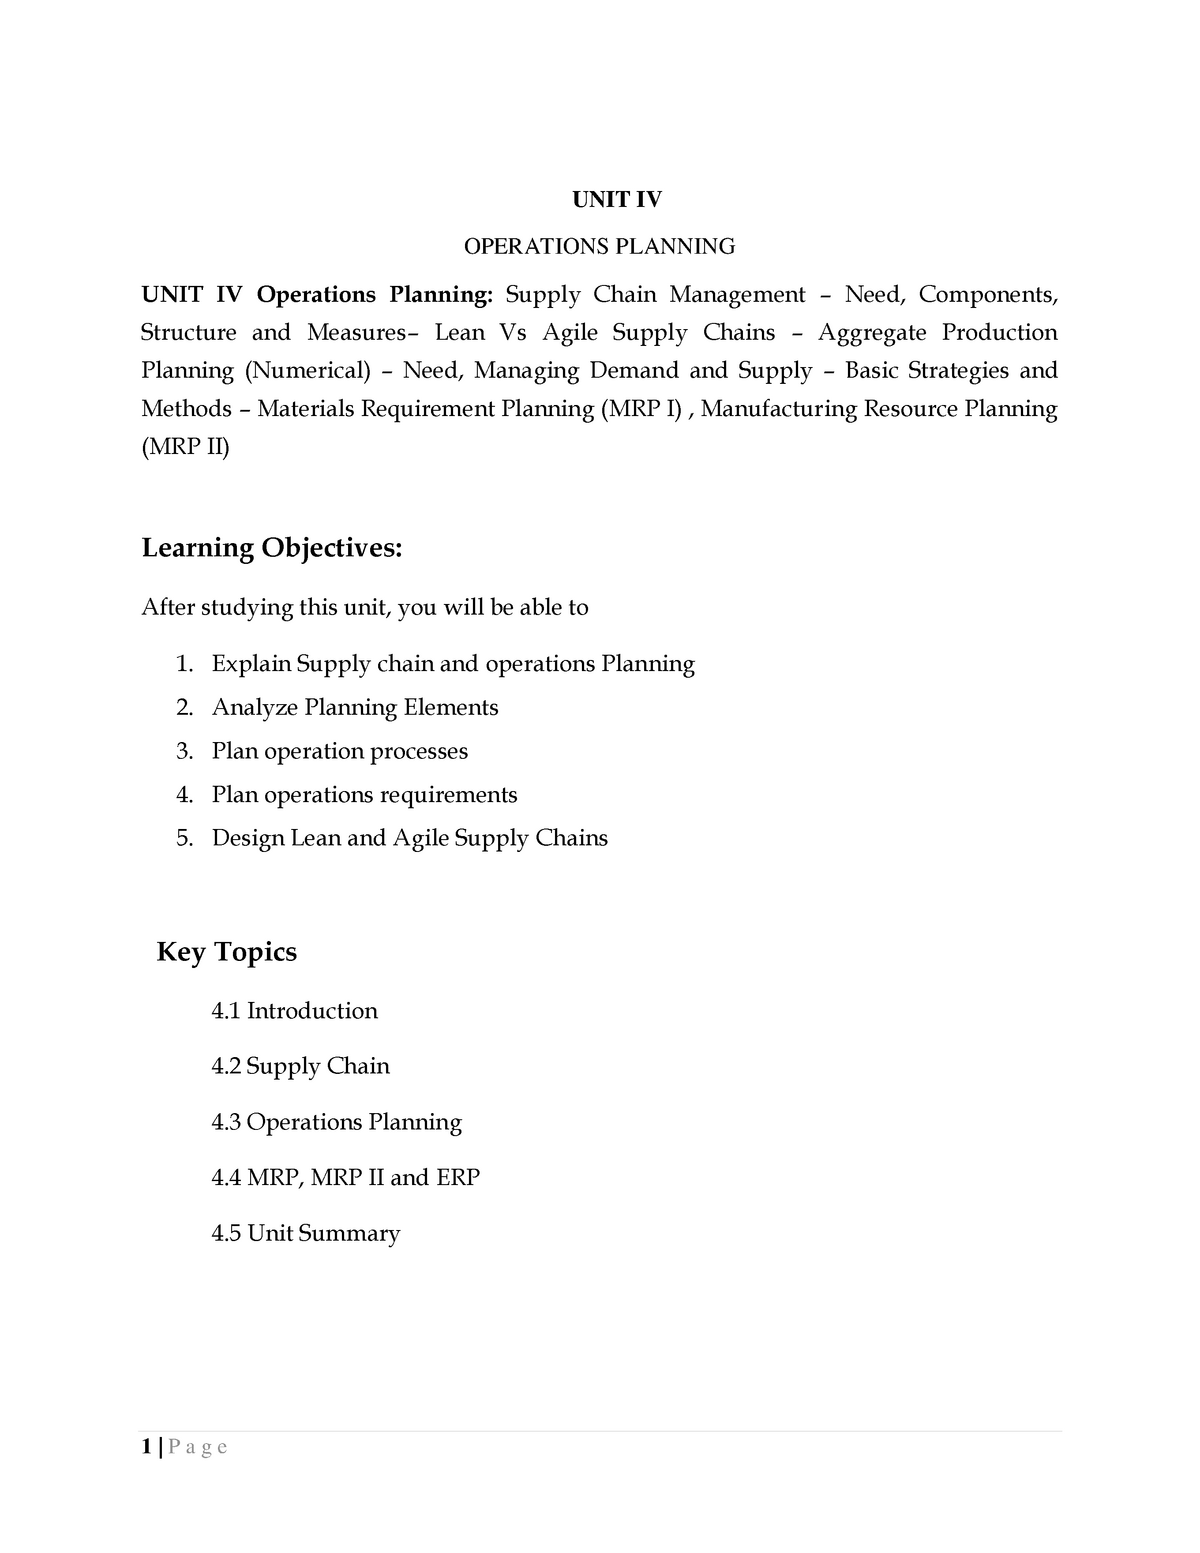 dissertation thesis on operations management